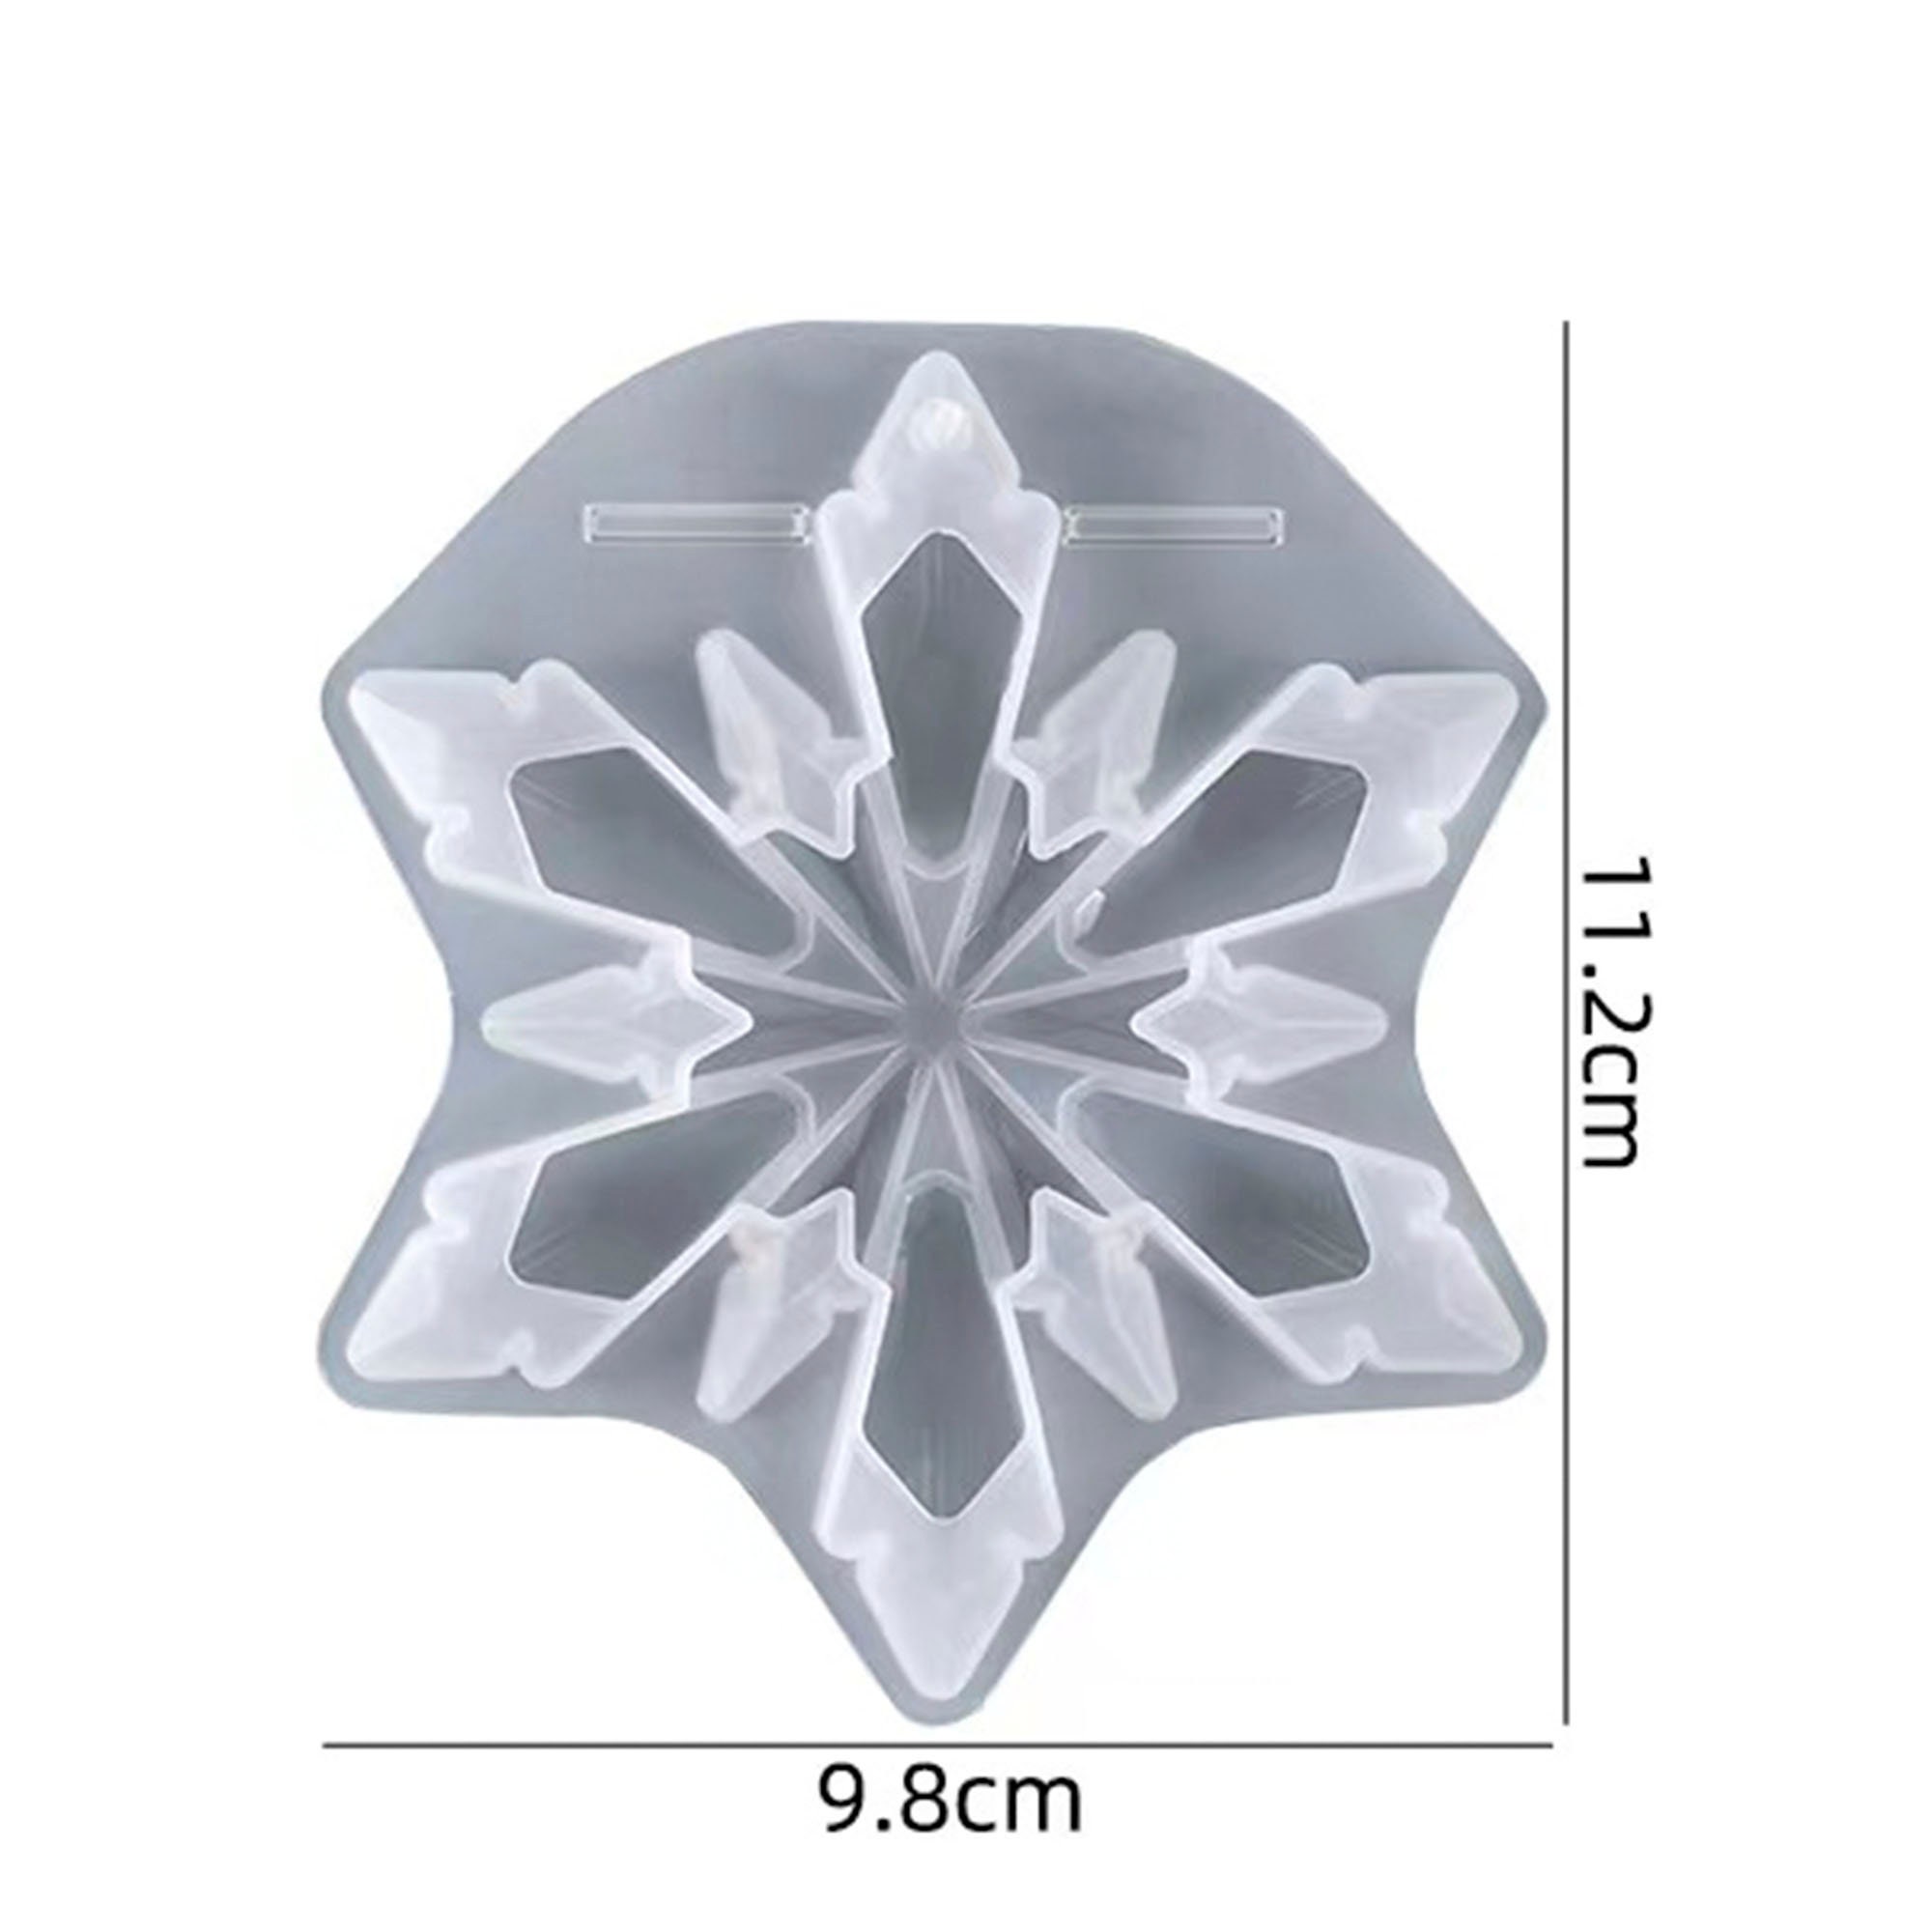 3D Snowflakes Clear Silicone Mold Snowflake Mold, Christmas Decoden, Resin Cabochon Mold, Winter Embellishments